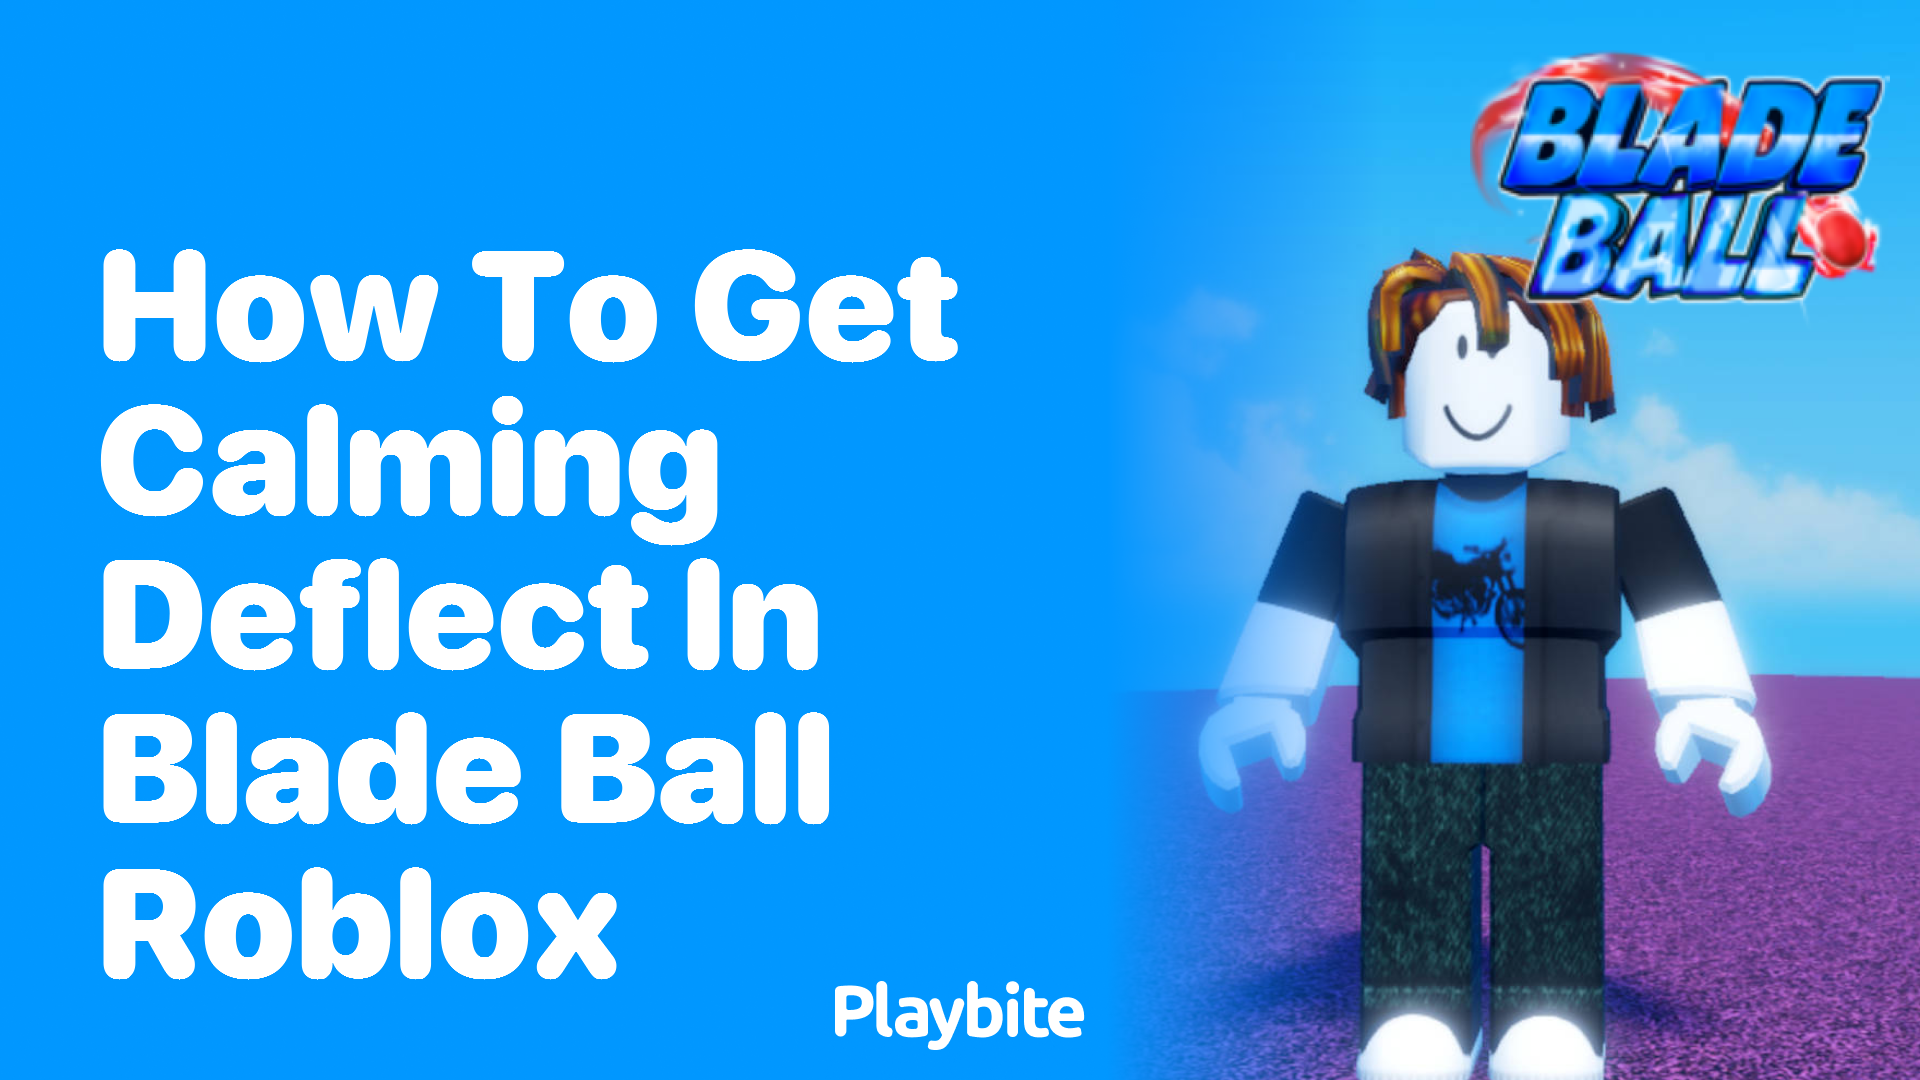 How to Get Calming Deflect in Blade Ball Roblox